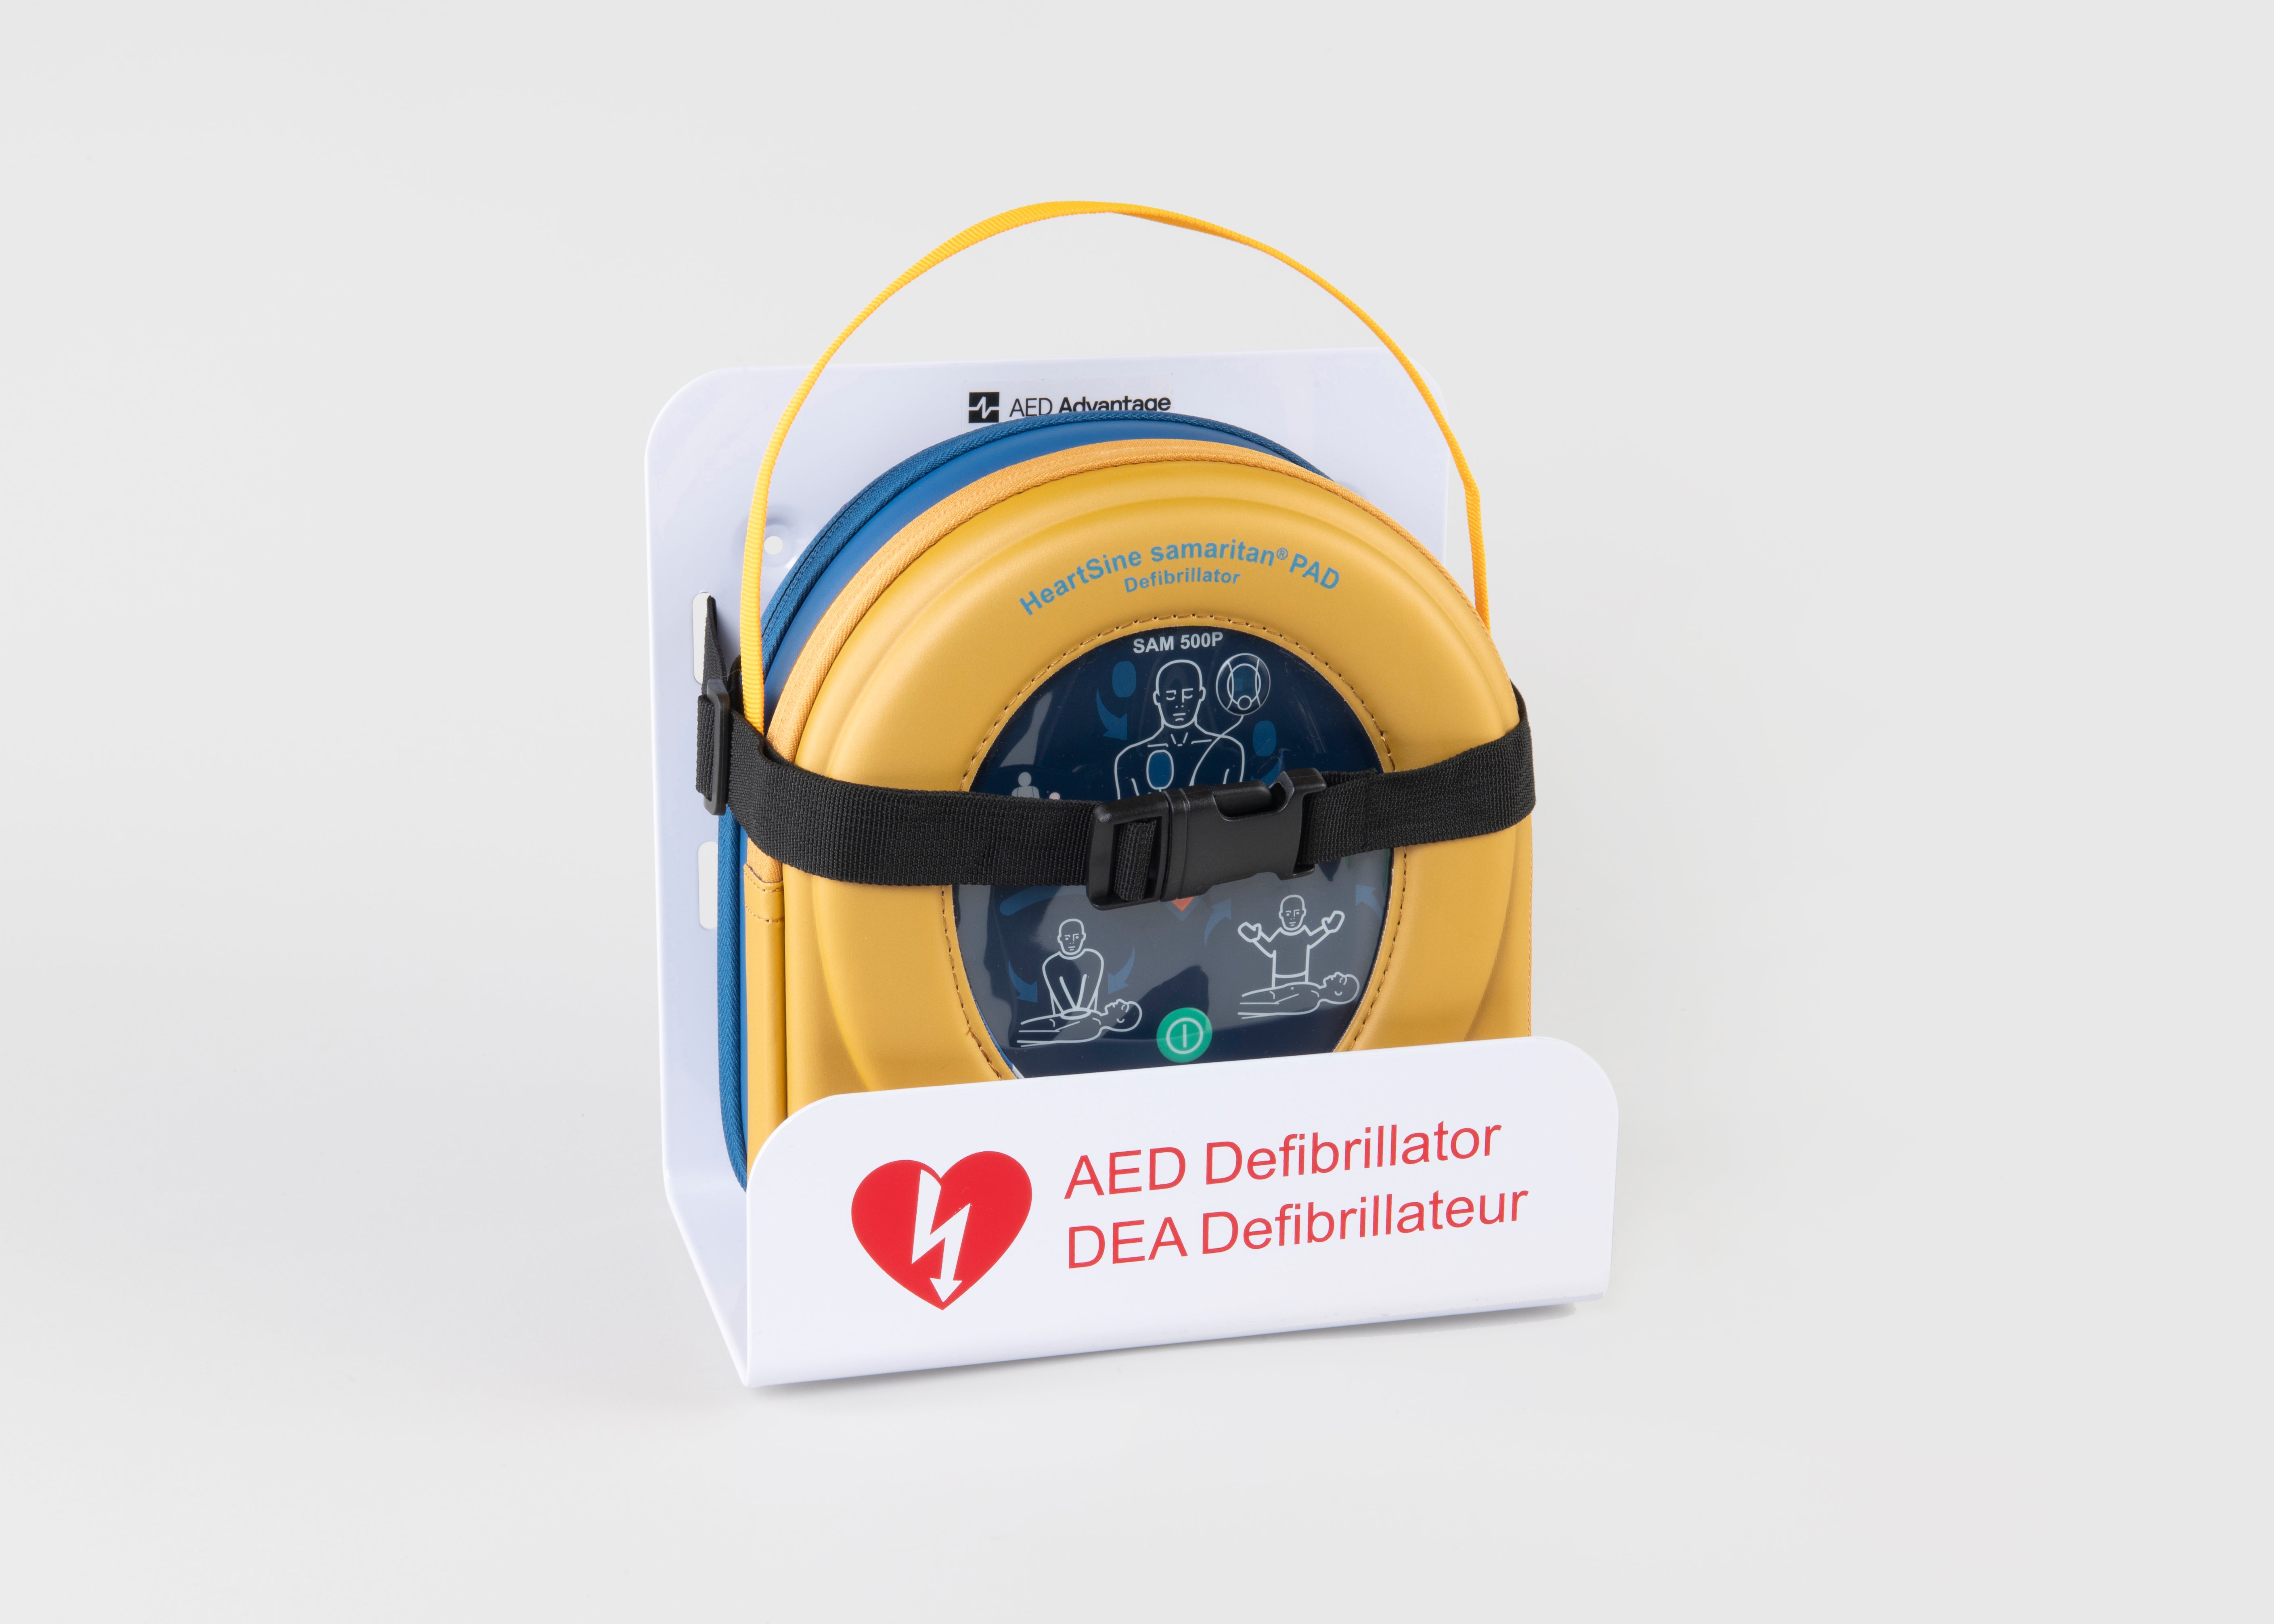 A HeartSine 500P AED in its yellow carry case strapped into a white wall mount bracket